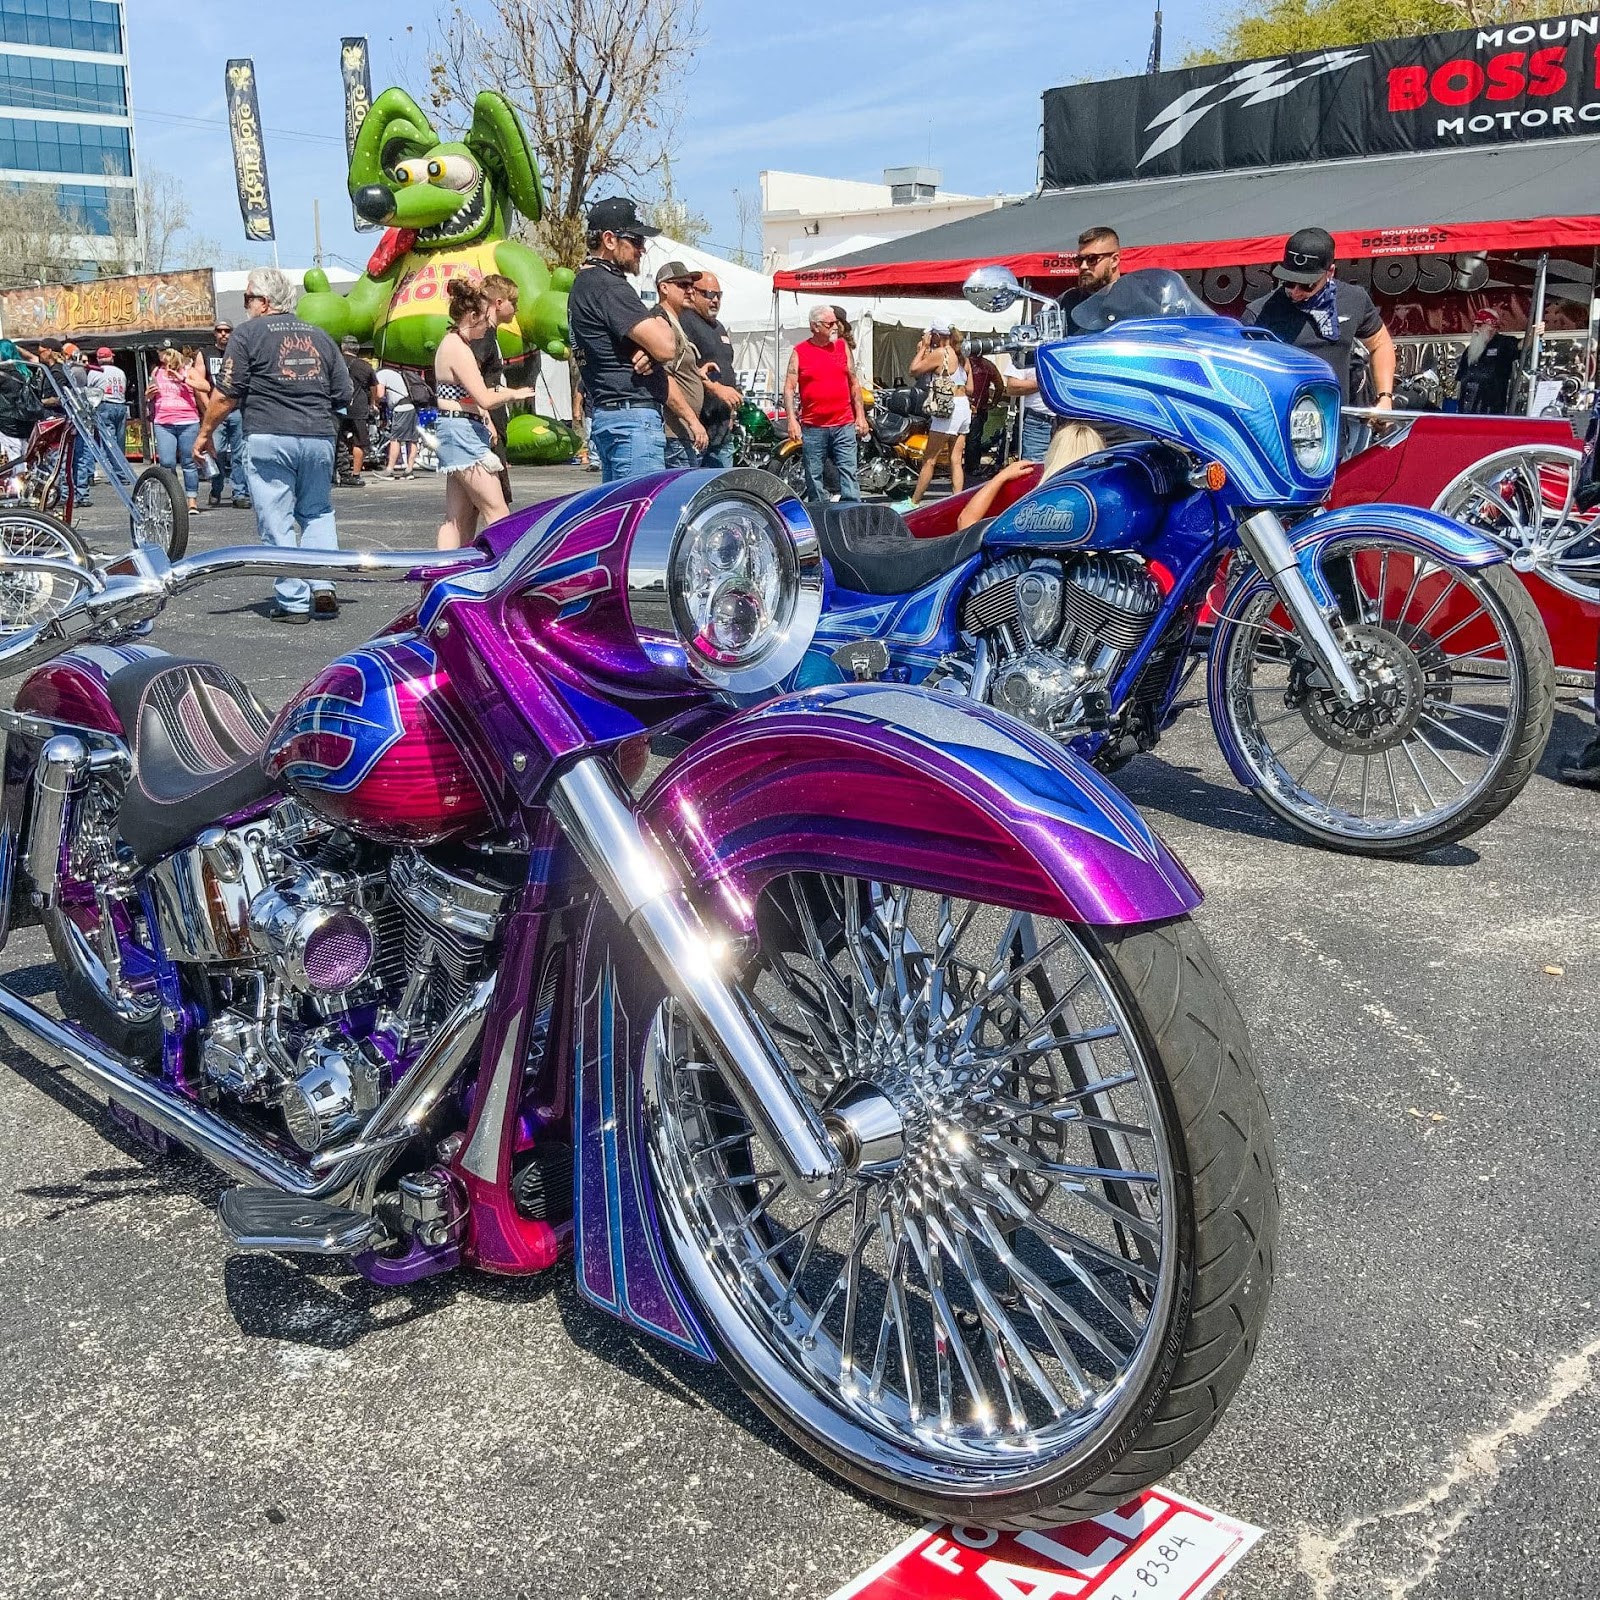 This customized chopper in fuchsia and blue with spoked, shiny, chrome wheels is shown at the 80th Daytona Bike Week.